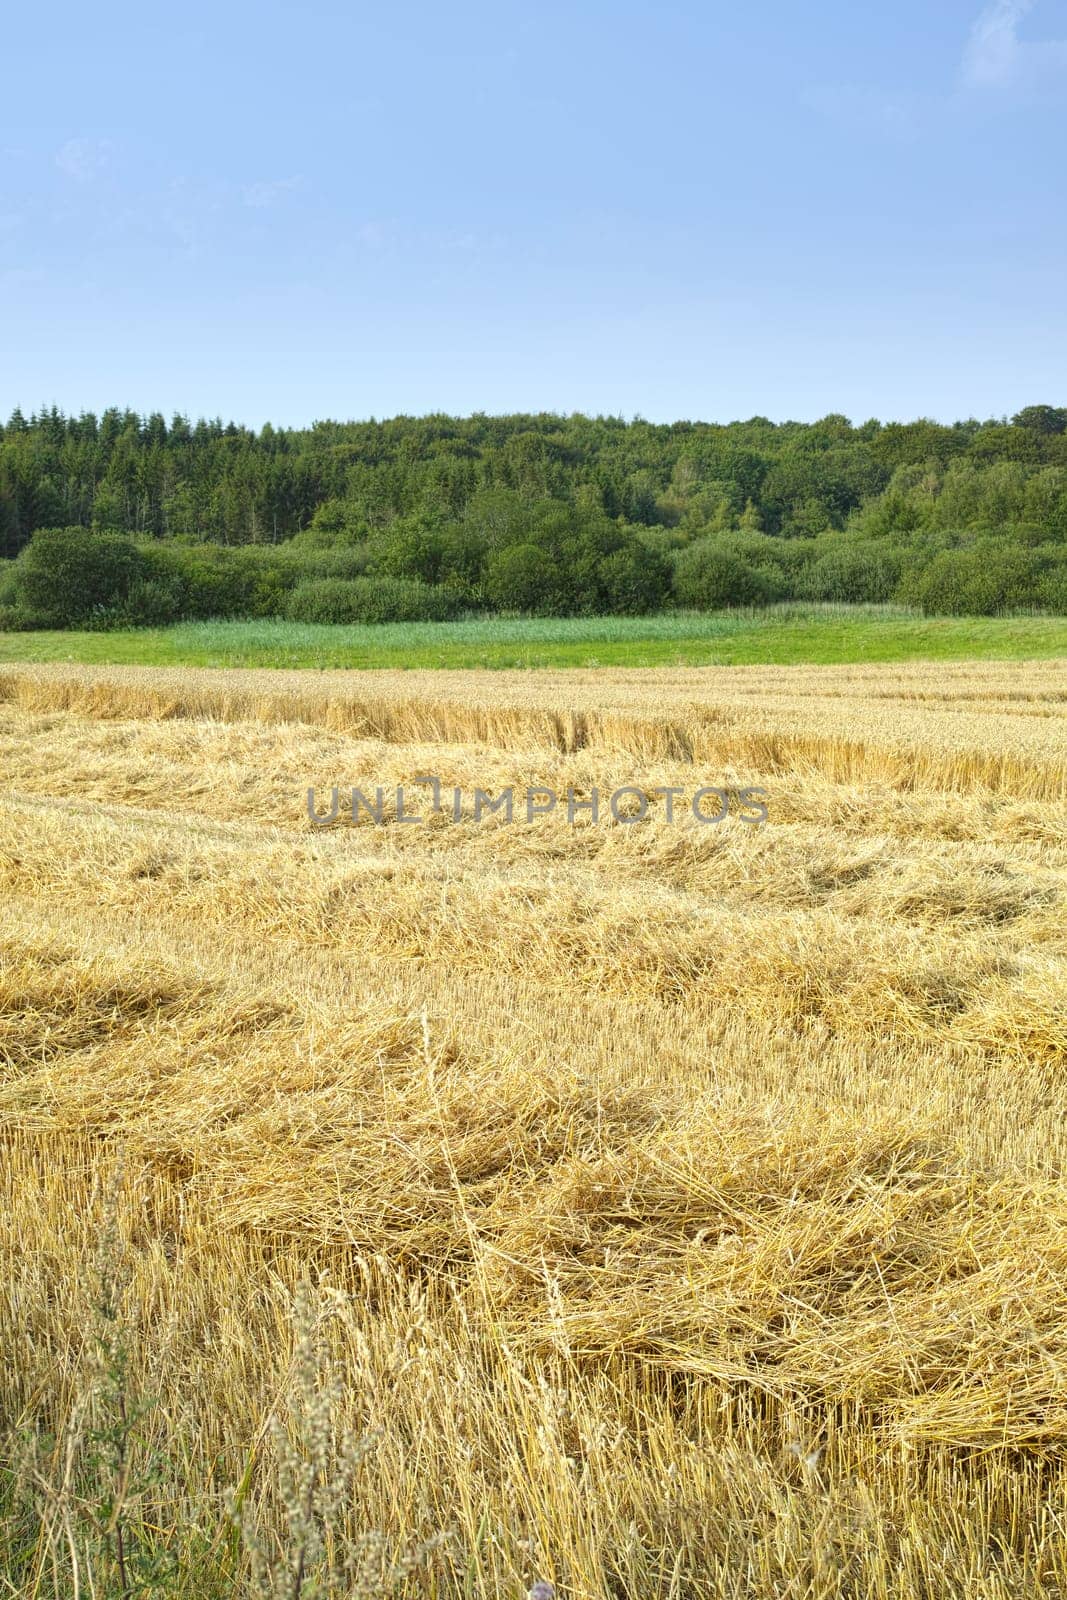 Natural, harvest or agriculture in countryside with wheat, landscape for growth in spring. Sustainable, environment or barley crop, farming export for beer industry on eco friendly farm or field.